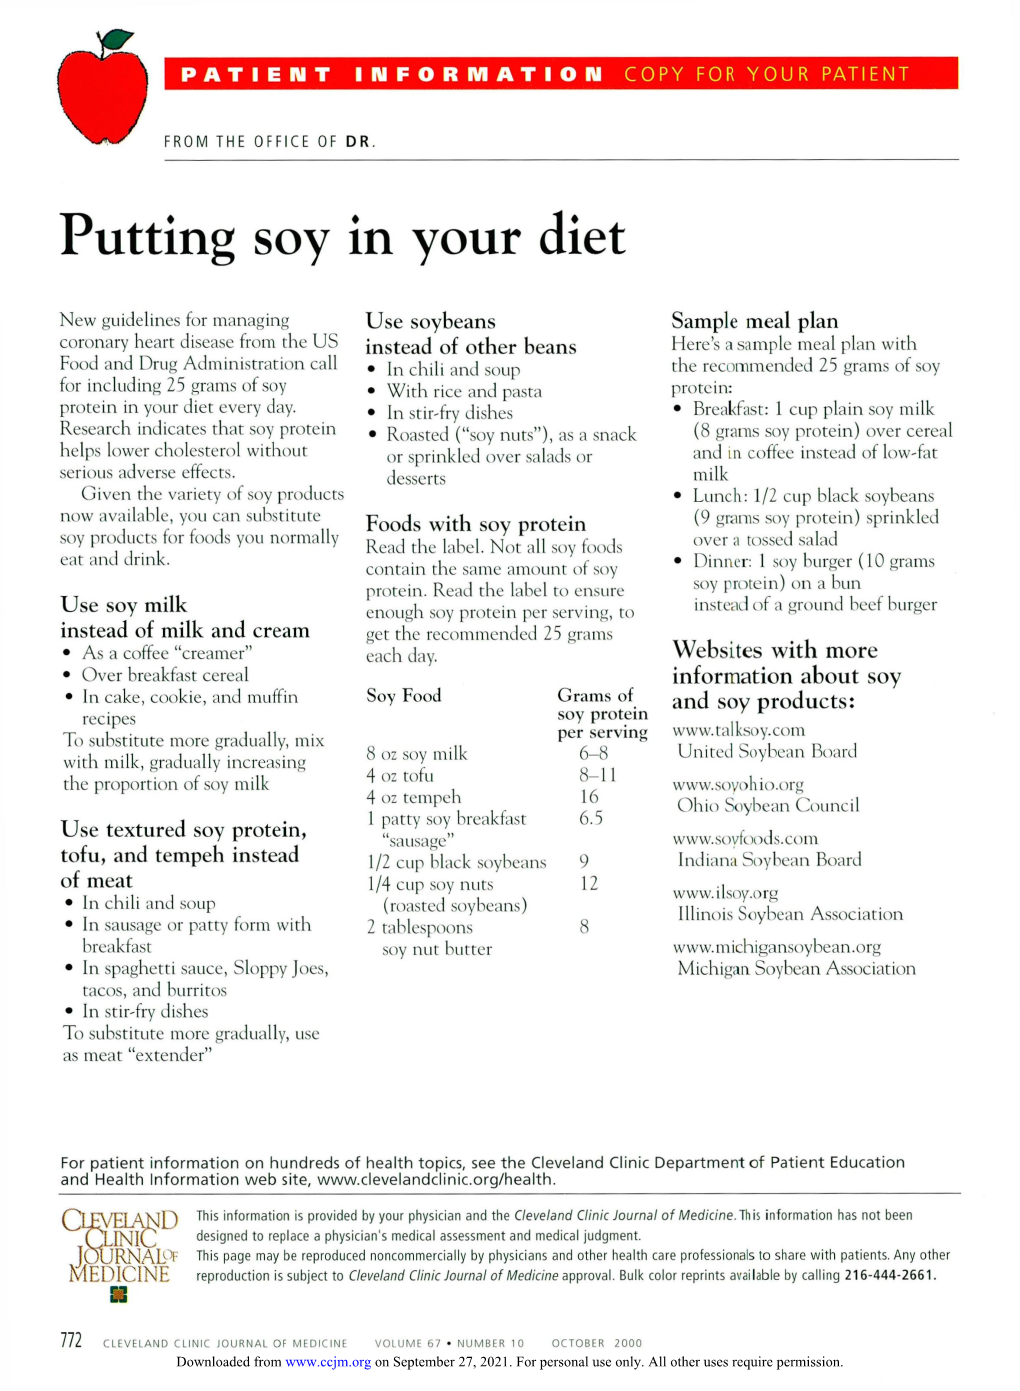 Putting Soy in Your Diet